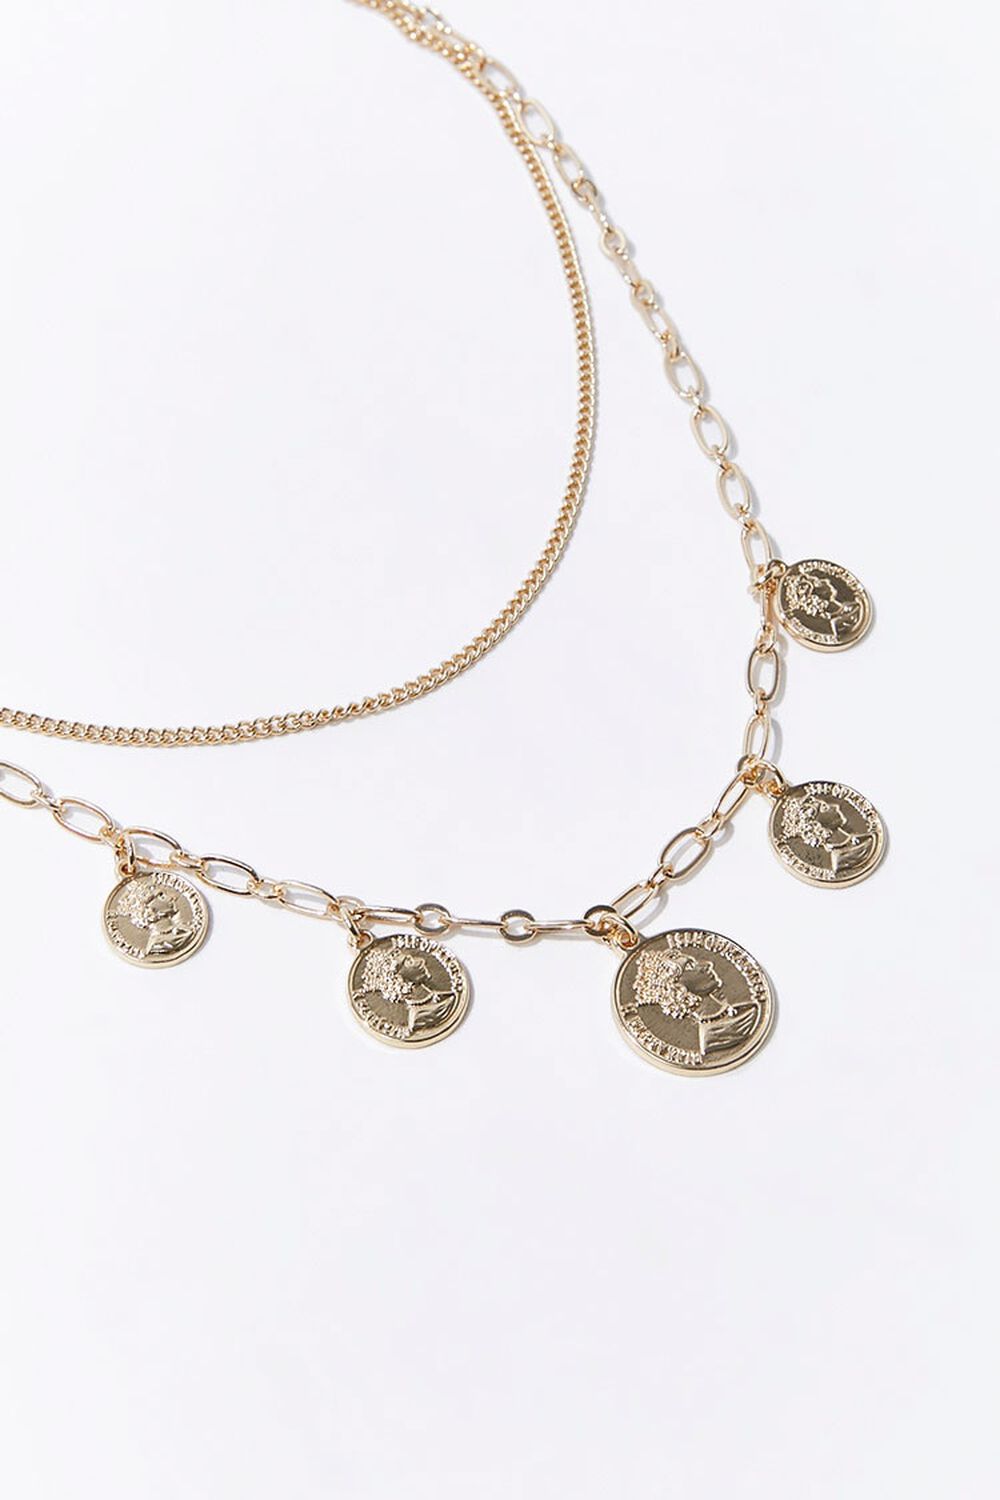 GOLD Sustainable Coin Necklace Set, image 1